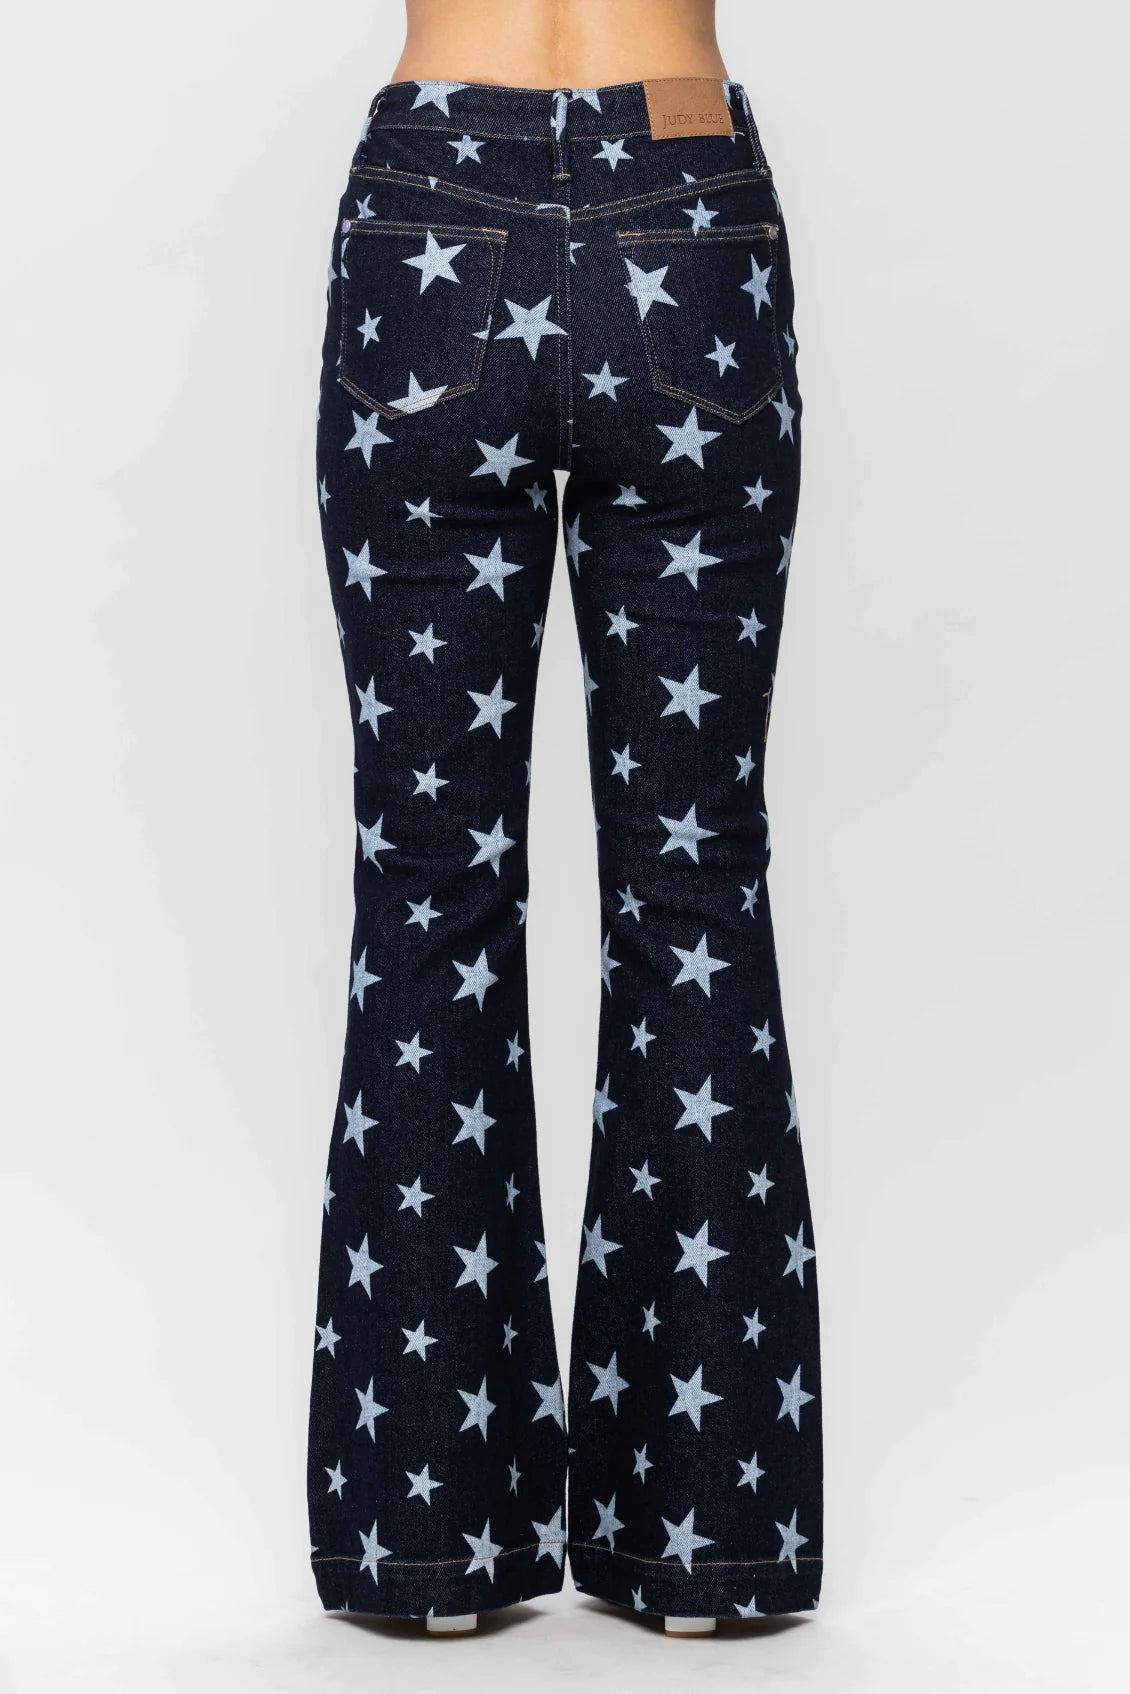 Judy Blue All Over Star Print Rinse Wash Flare Jeans JB88662